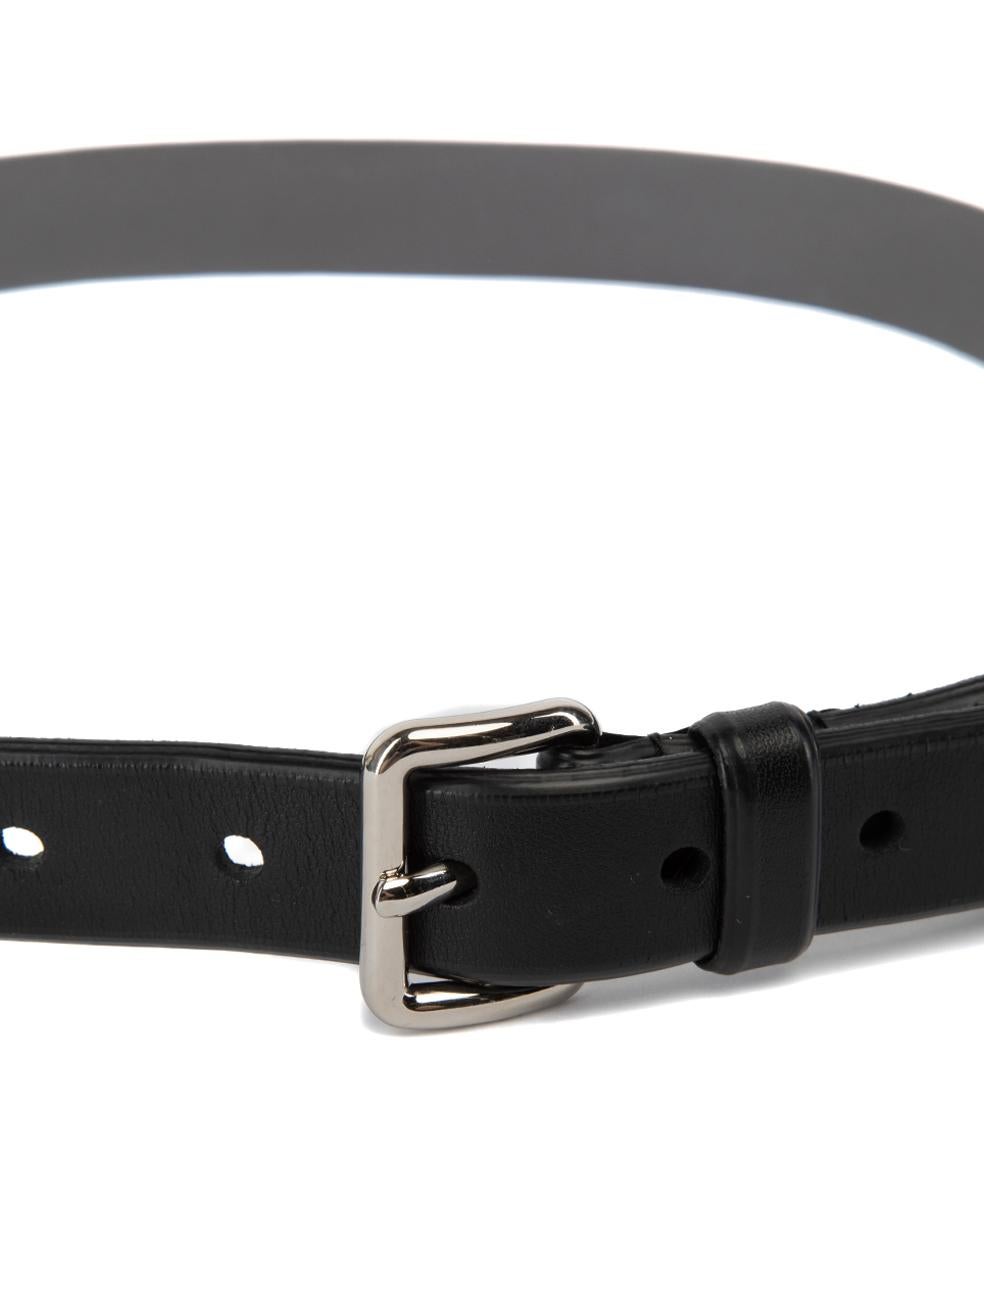 Pre-Loved Prada Women's Black Leather Belt with Silver Buckle 1